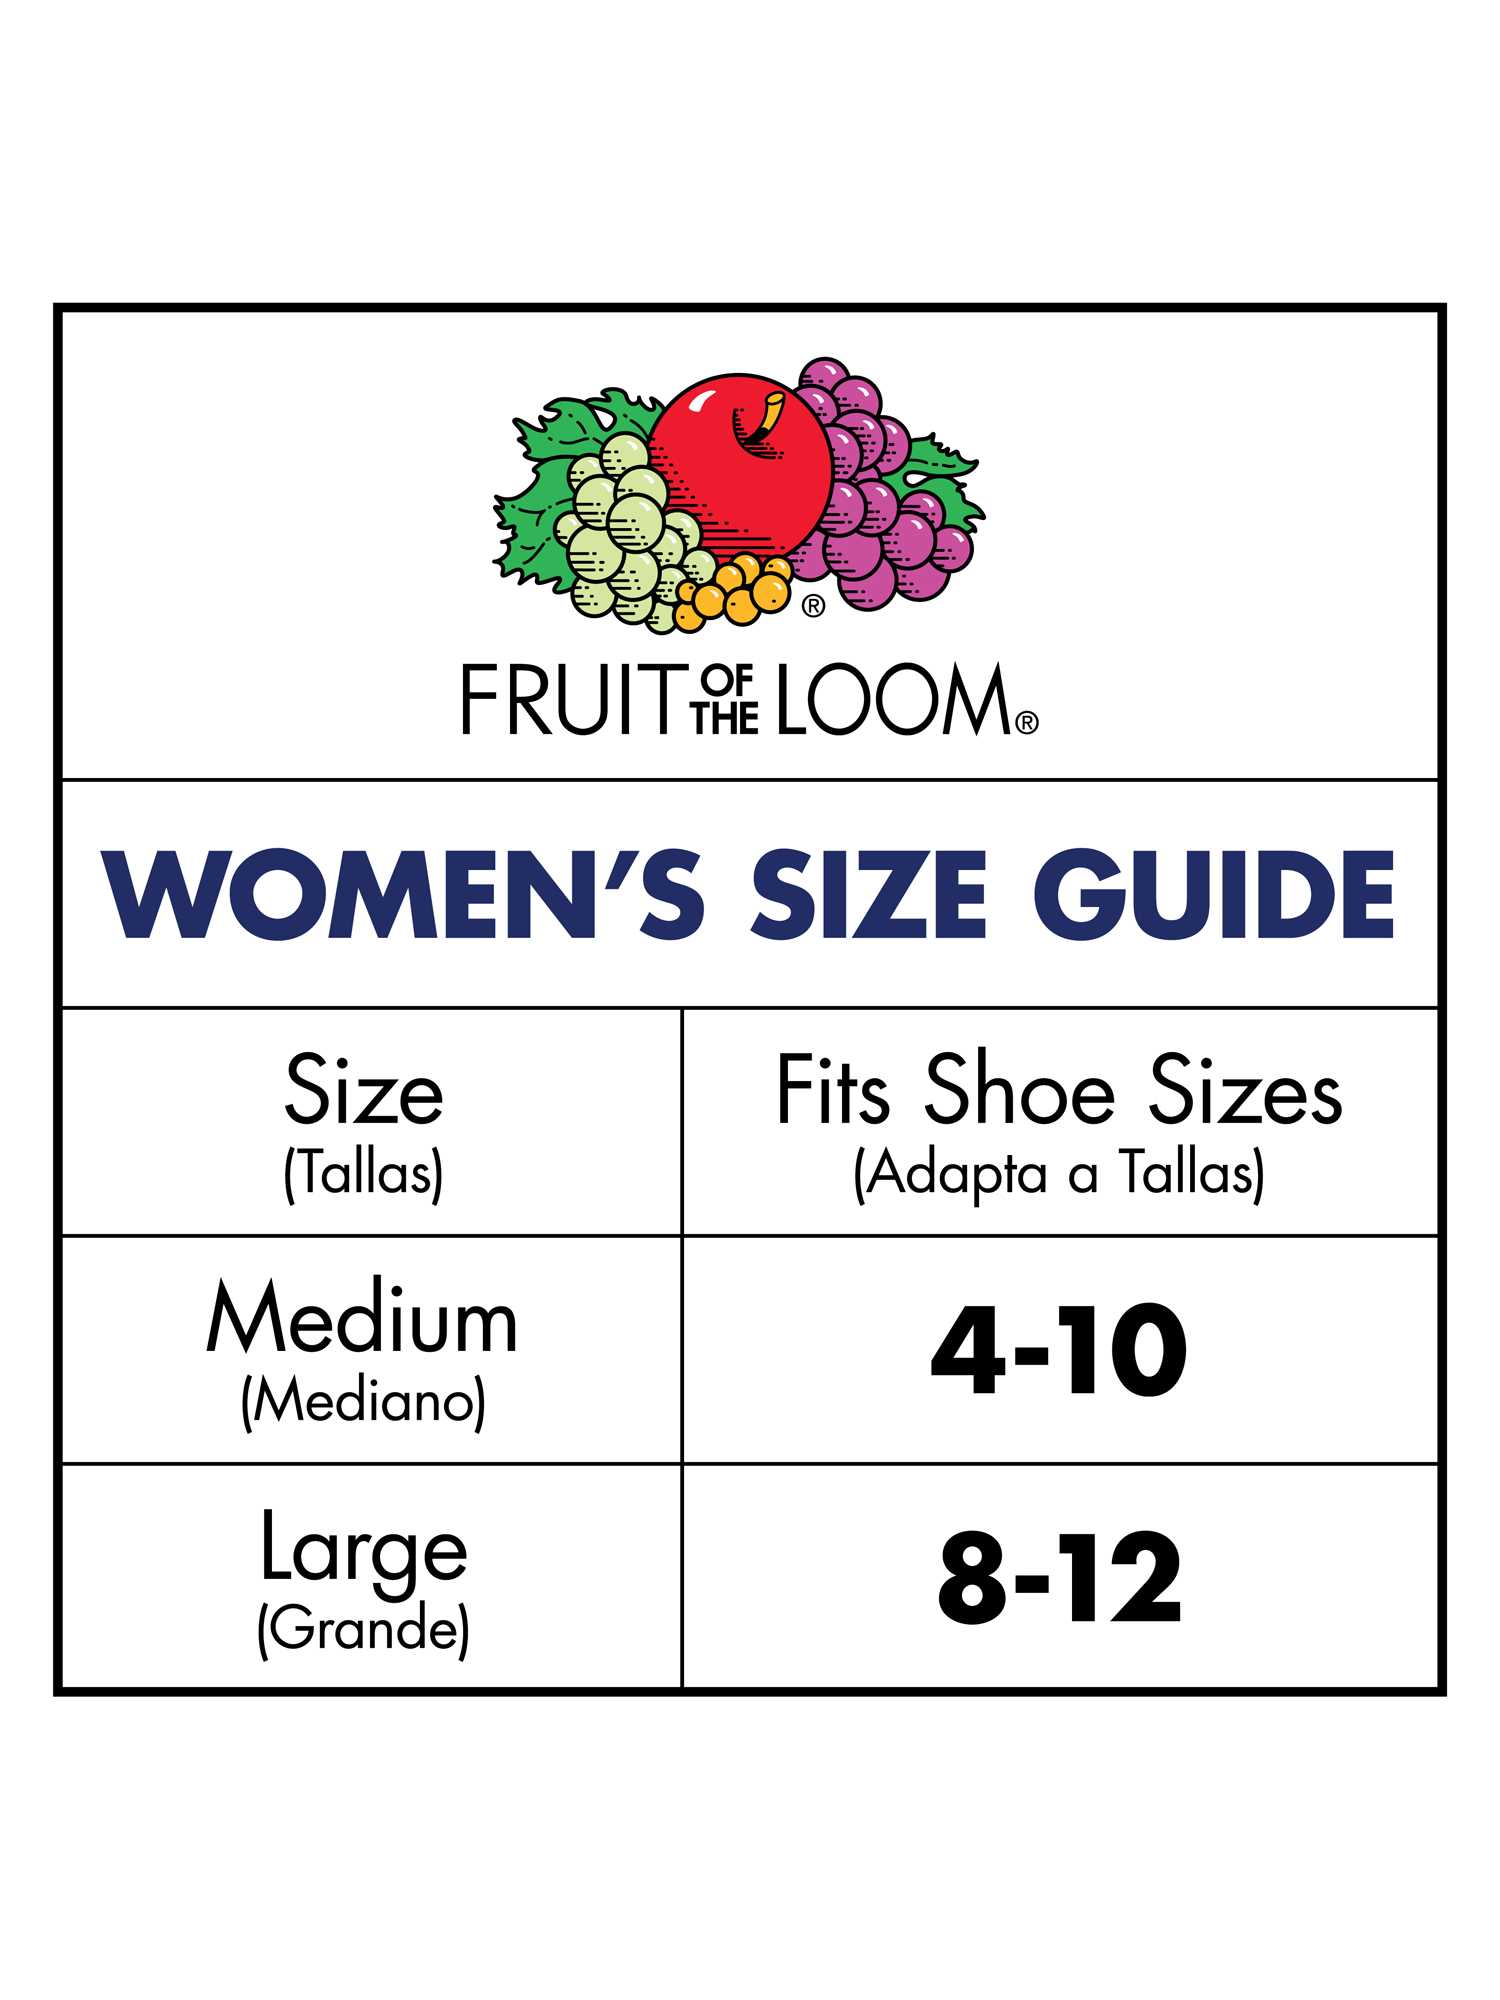 Fruit of the Loom Women's CoolZone Cotton Cushioned No Show Socks, 6-Pack - image 5 of 9